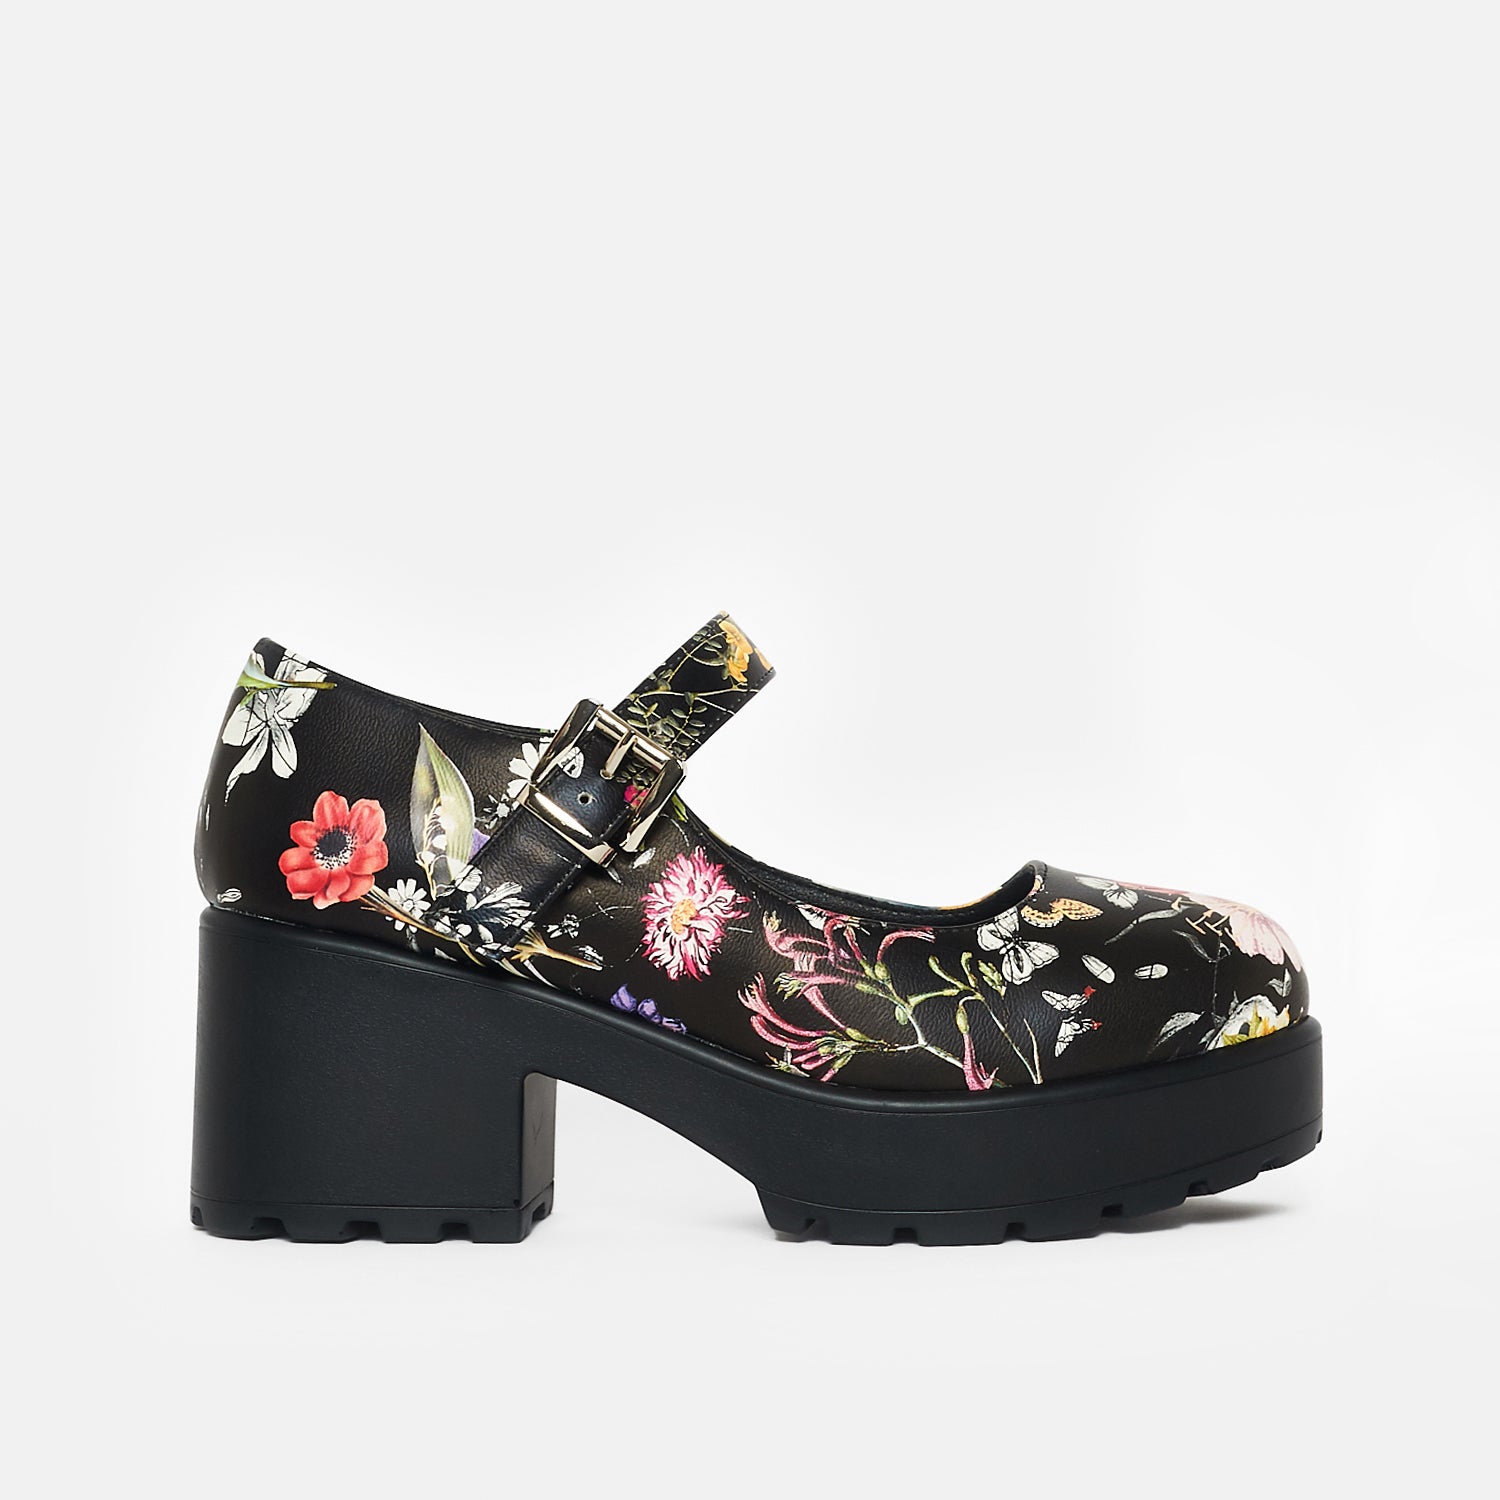 Tira Mary Jane Shoes 'Floral Edition' - Mary Janes - KOI Footwear - Black - Side View